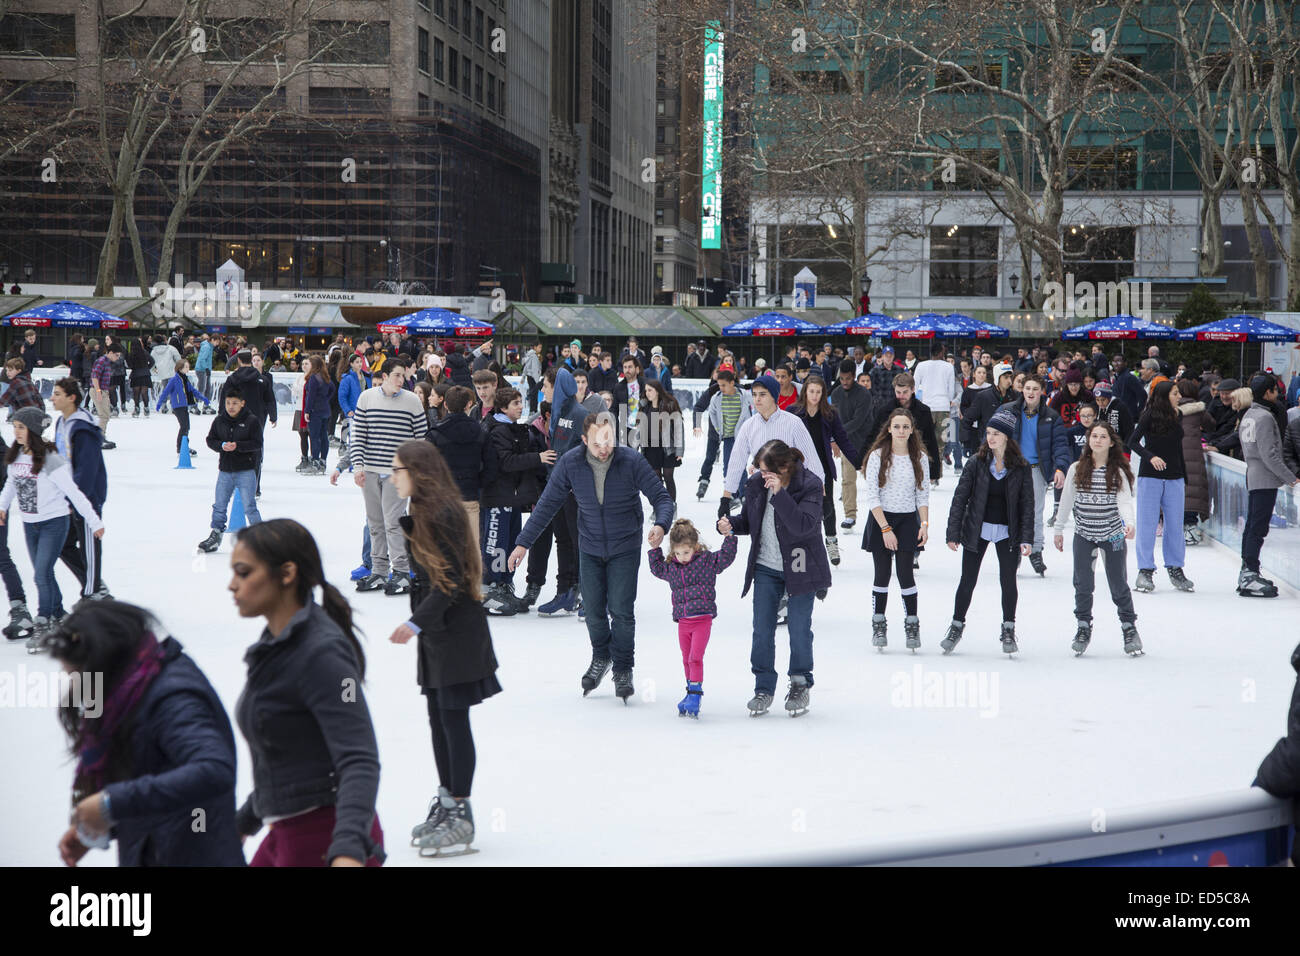 People enjoy the holiday season ice skating at Bryant Park in midtown Manhattan, NYC. Stock Photo